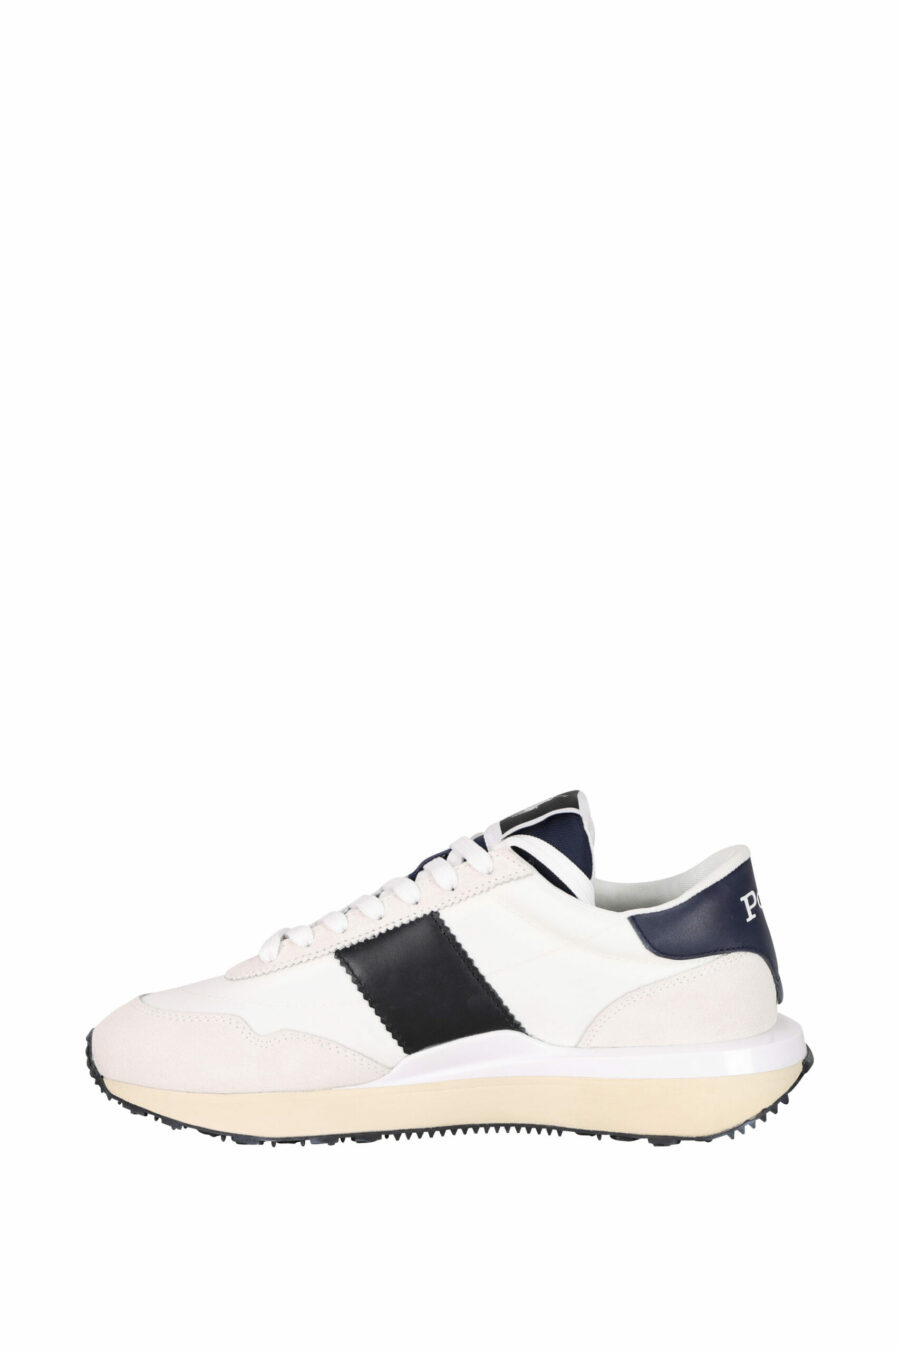 White trainers with blue "train" detail and white "polo" minilogue - 3616535114890 2 scaled